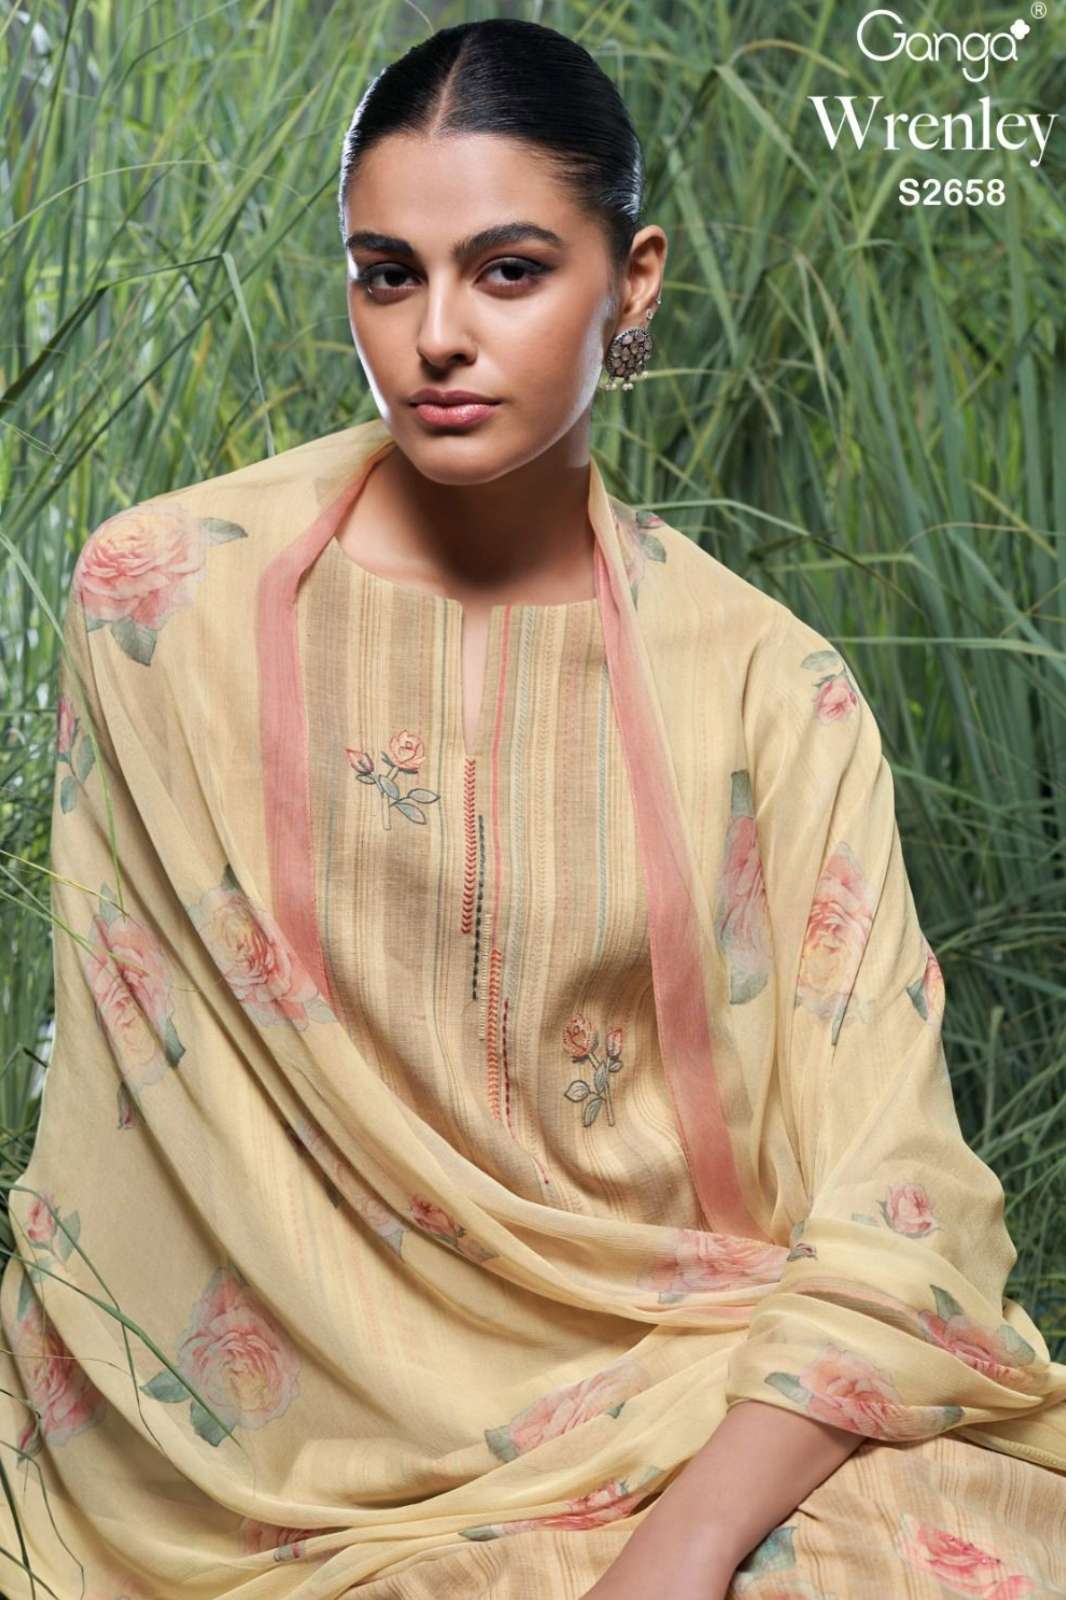 GANGA WRENLEY S2658 PREMIUM WOVEN JACQUARD PRINTED SUIT WITH EMBROIDERY WORK